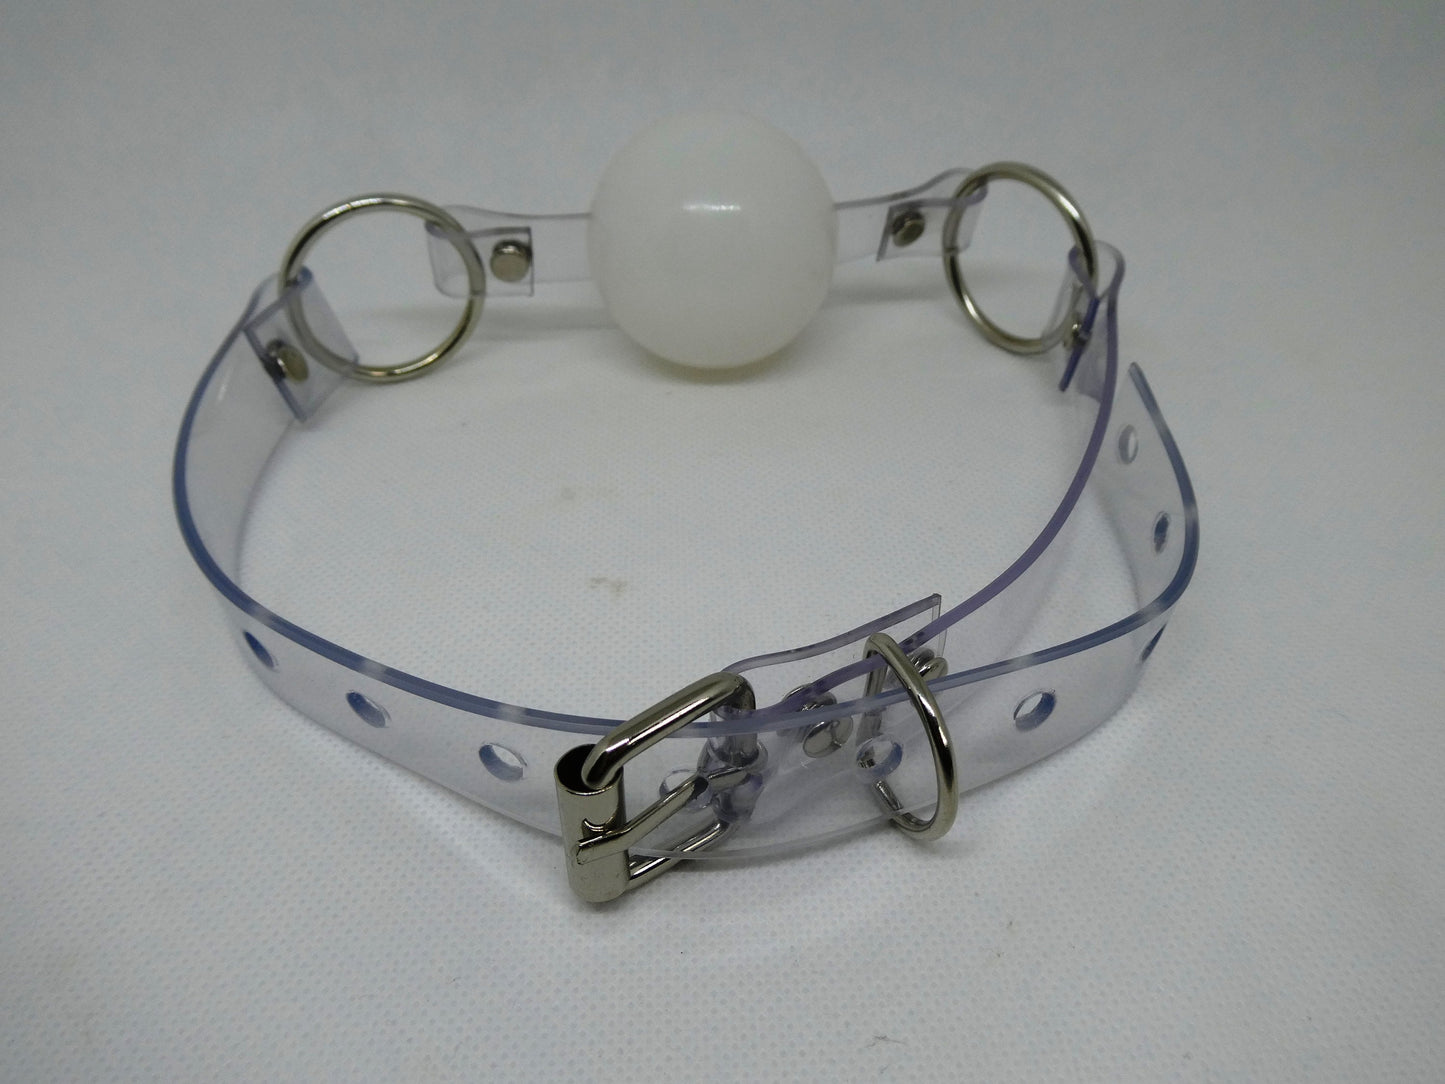 White Silicon Ball Gag with PVC clear strap -Lockable -Vegan